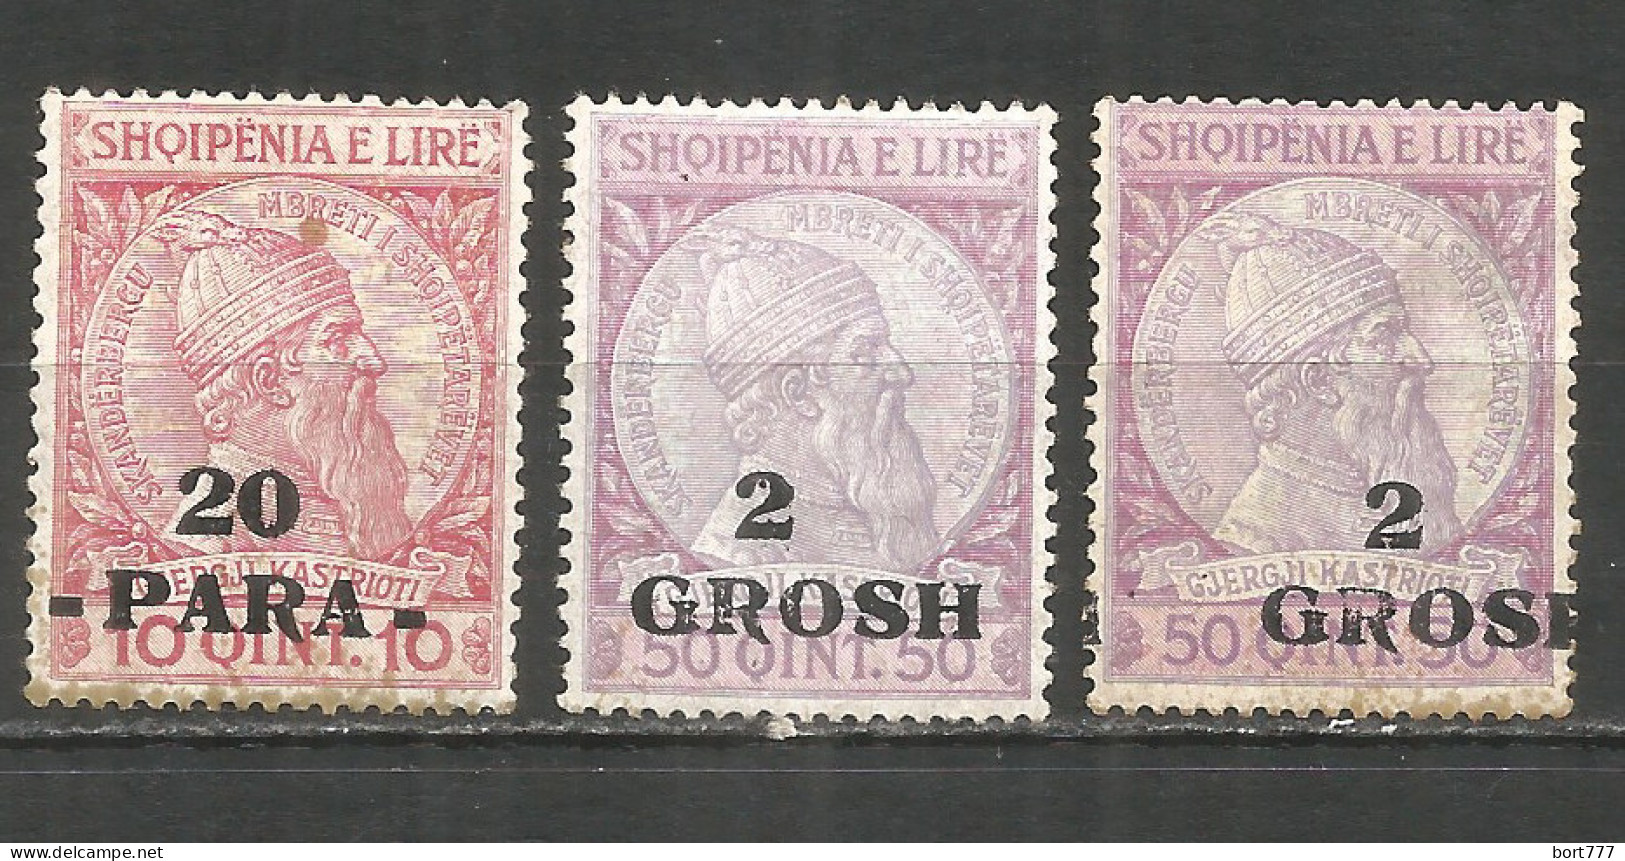 ALBANIA 1914 Mint Stamps MLH - Albanien